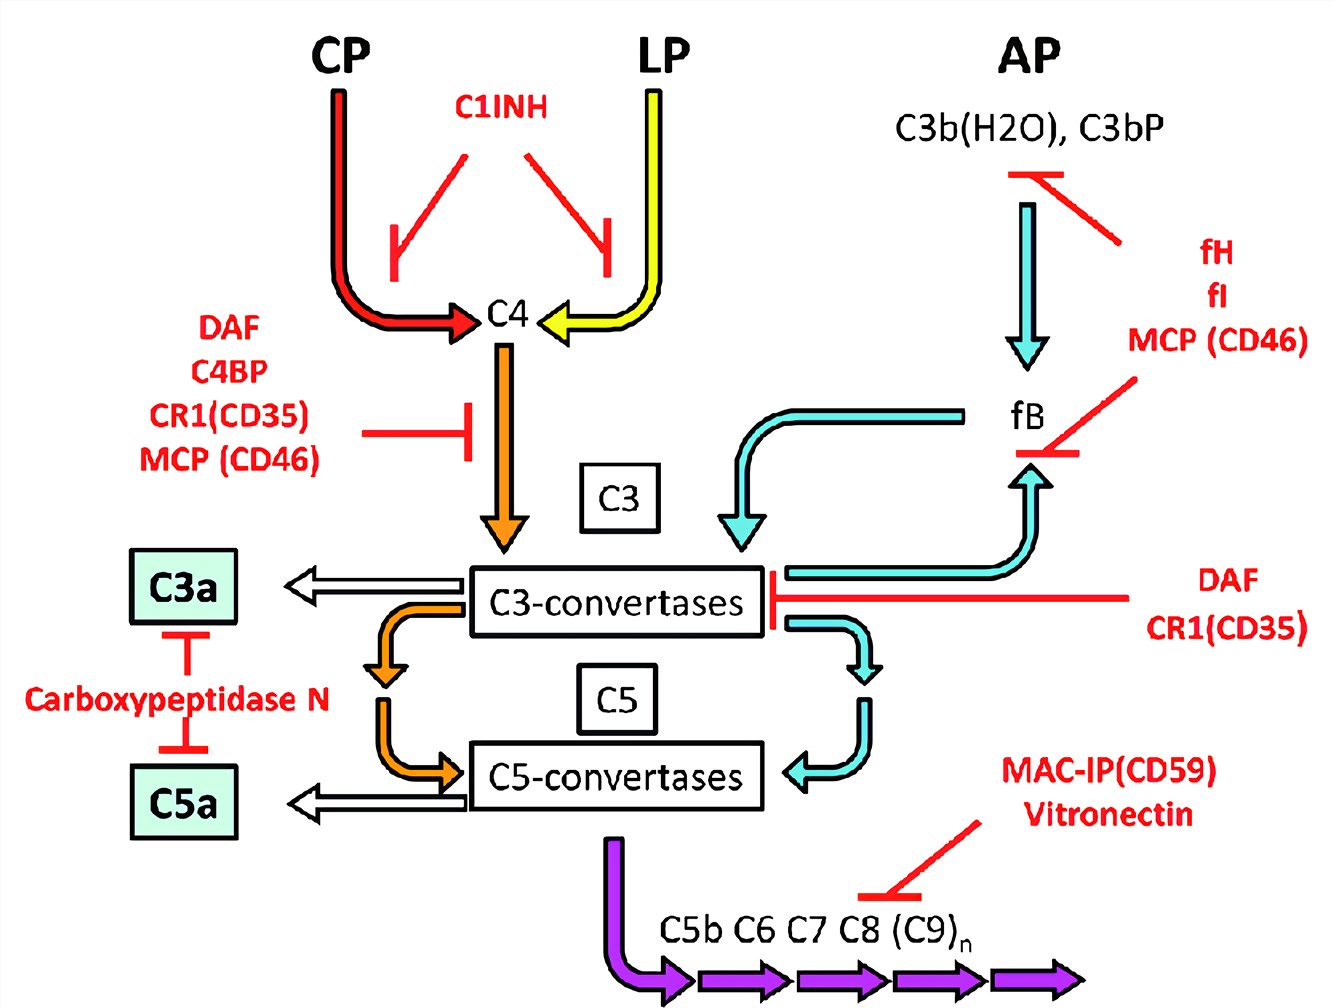 Schematic presentation of key complement regulators in the complement system. 